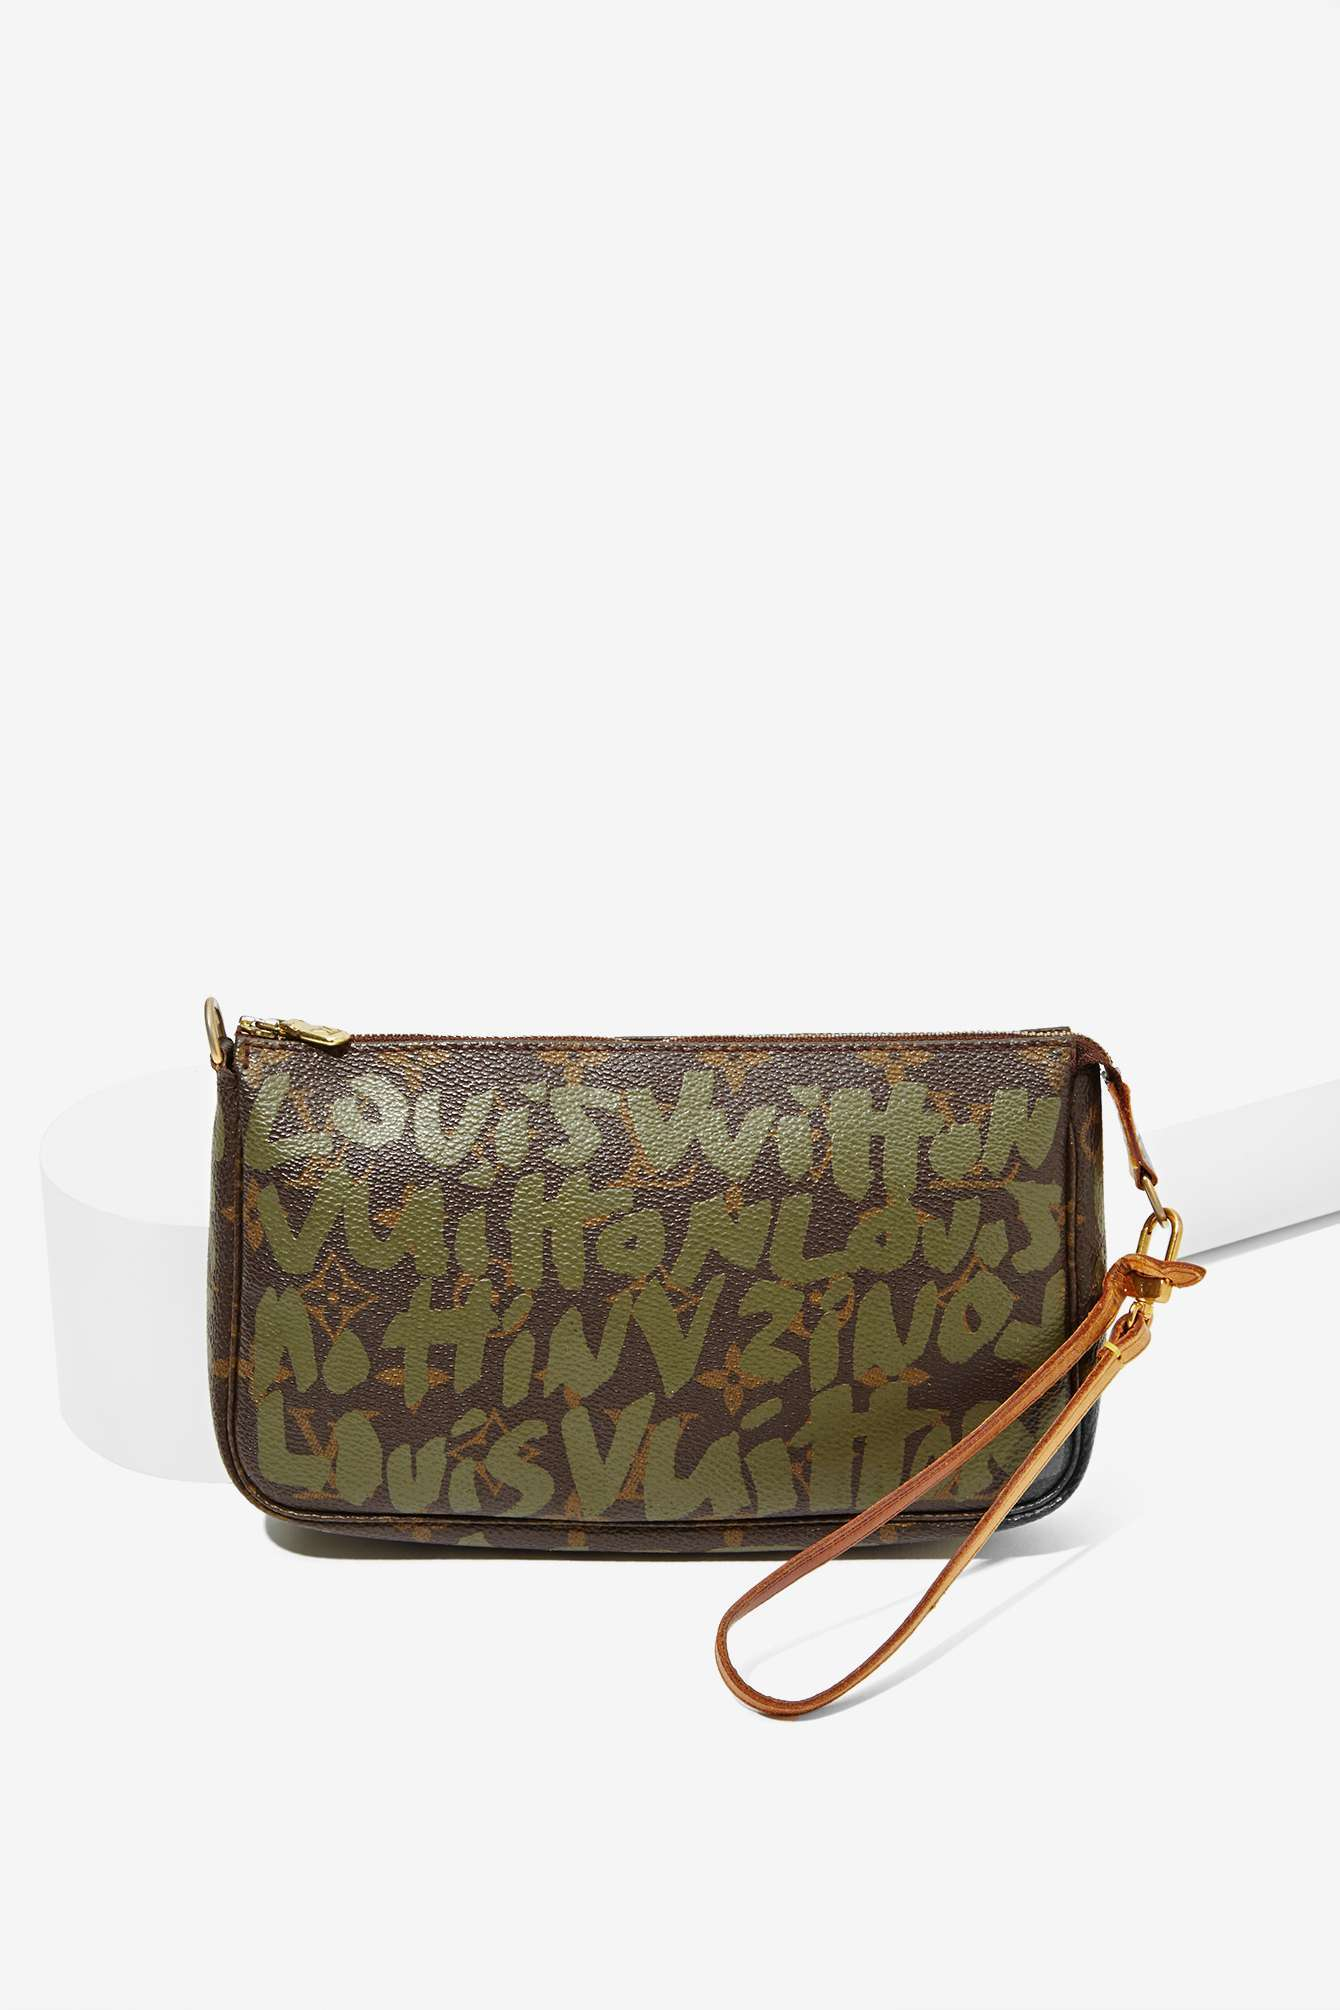 Lyst - Nasty Gal Vintage Louis Vuitton Monogram Sprouse Olive Pochette in Green